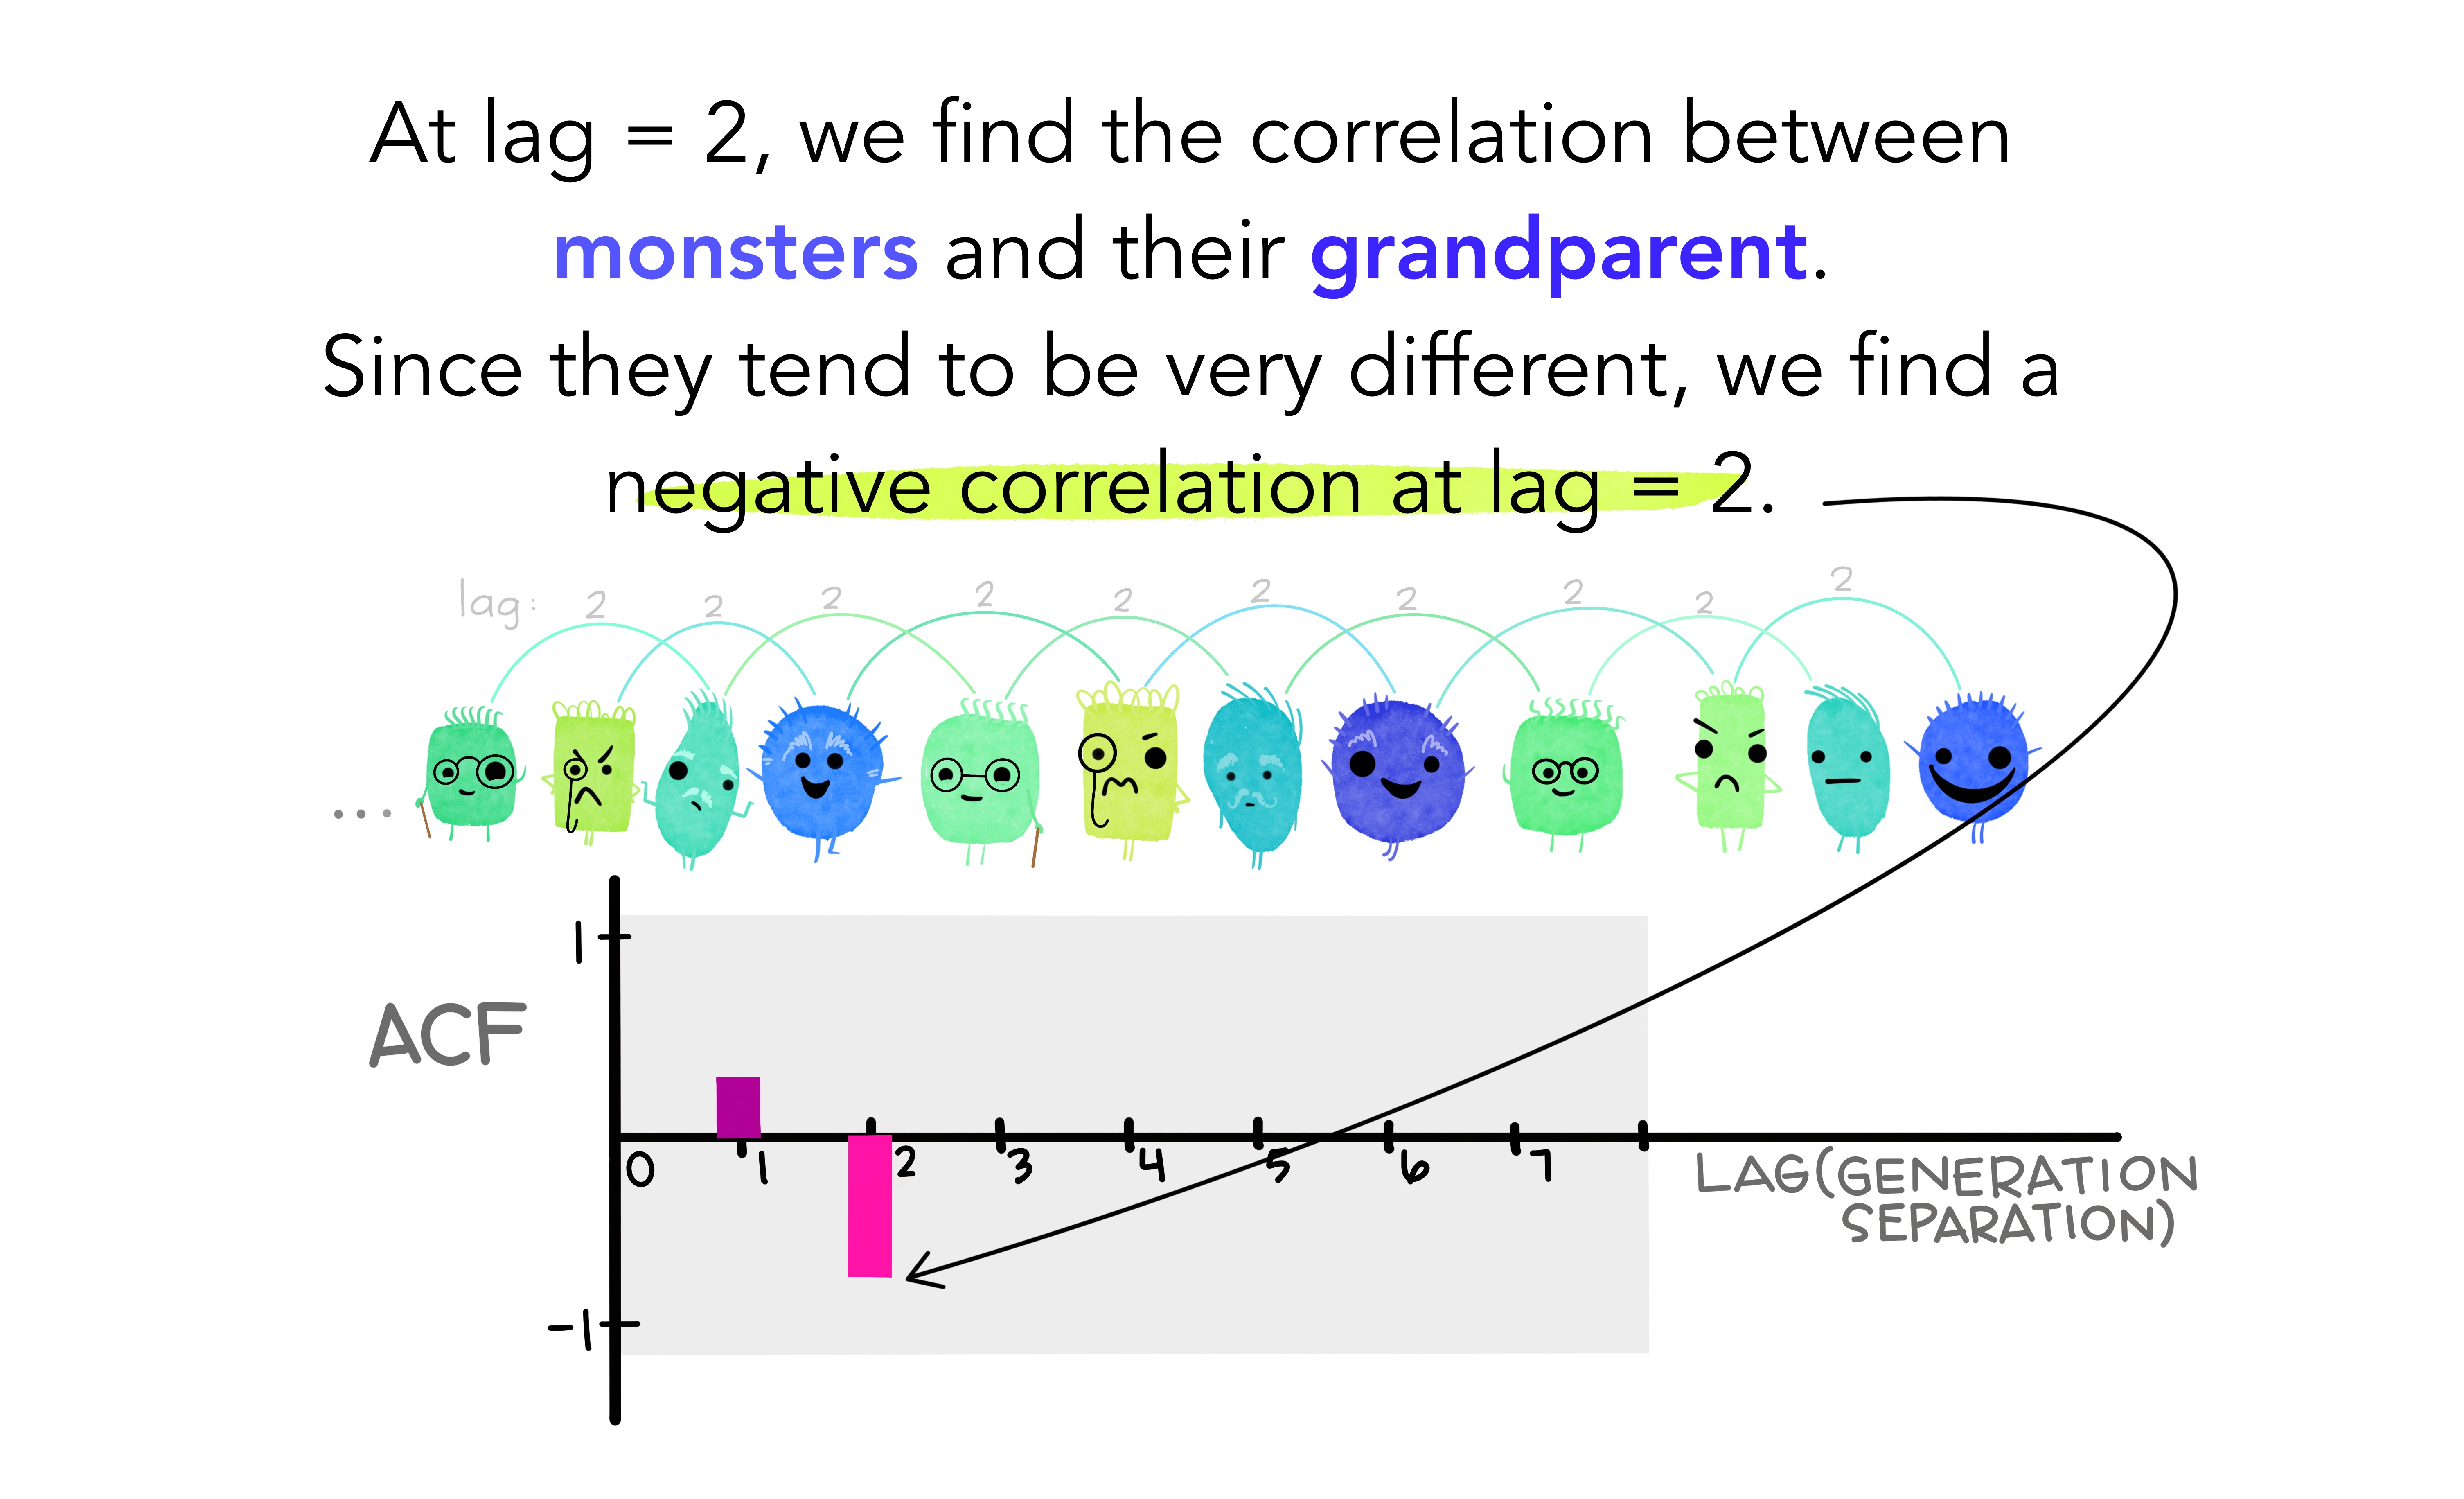 A long series of friendly looking monsters representing generations of their family. An arc with “2” is drawn between each monster and the one at a distance of 2 generations from it (lag = 2). Text reads “At lag = 2, we find the correlation between monsters and their grandparent. Since they tend to be very different, we find a negative correlation at lag = 2.” The ACF plot now has an additional negative bar at Lag = 2, indicating the negative correlation between each monster and their grandparent.